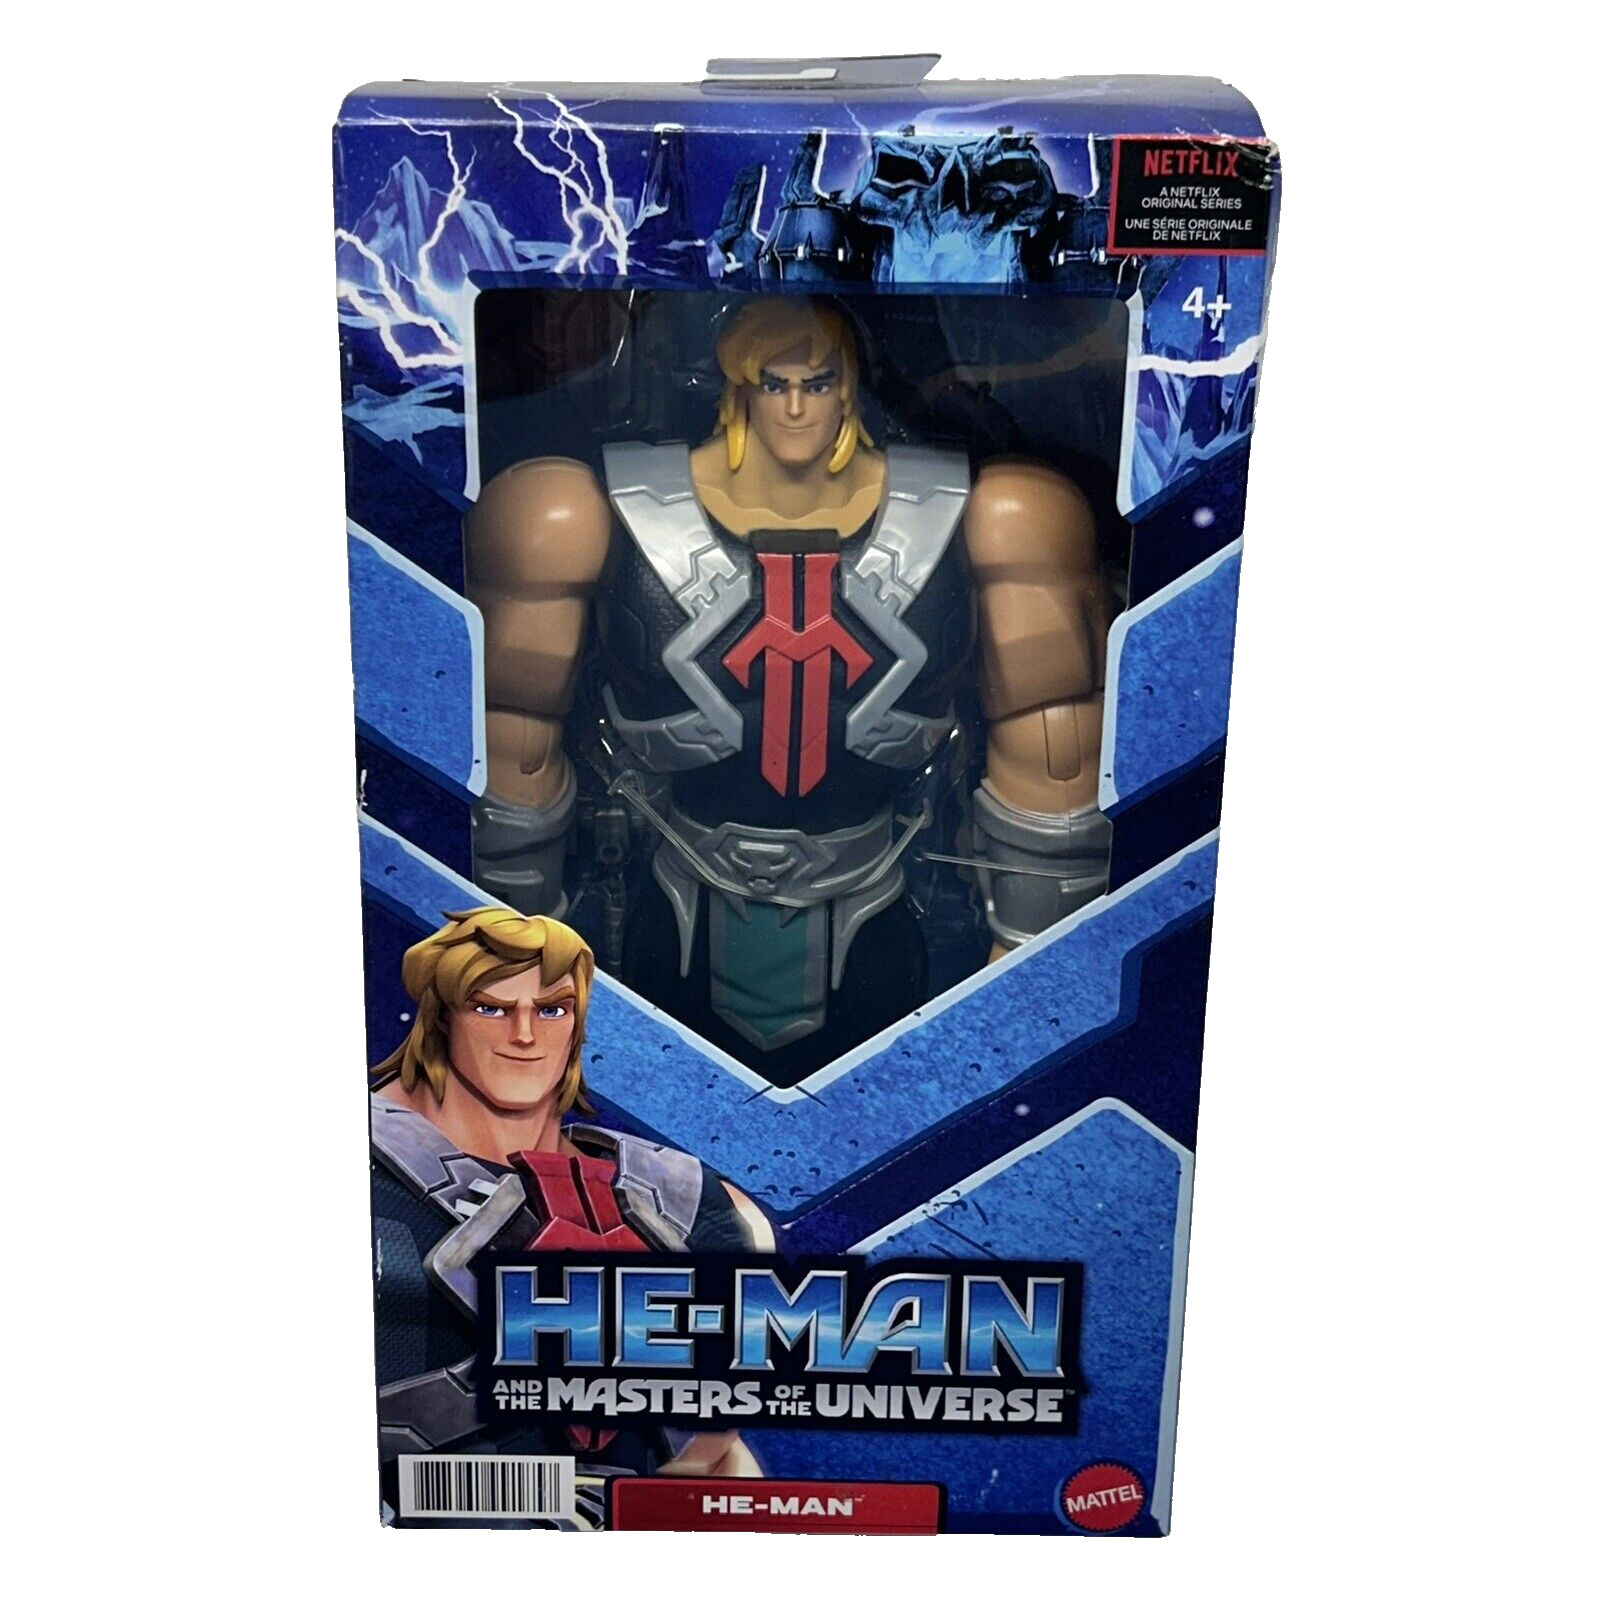 He-Man and the Masters of the Universe - He-Man 9" Action Figure Netflix (F4)(SH